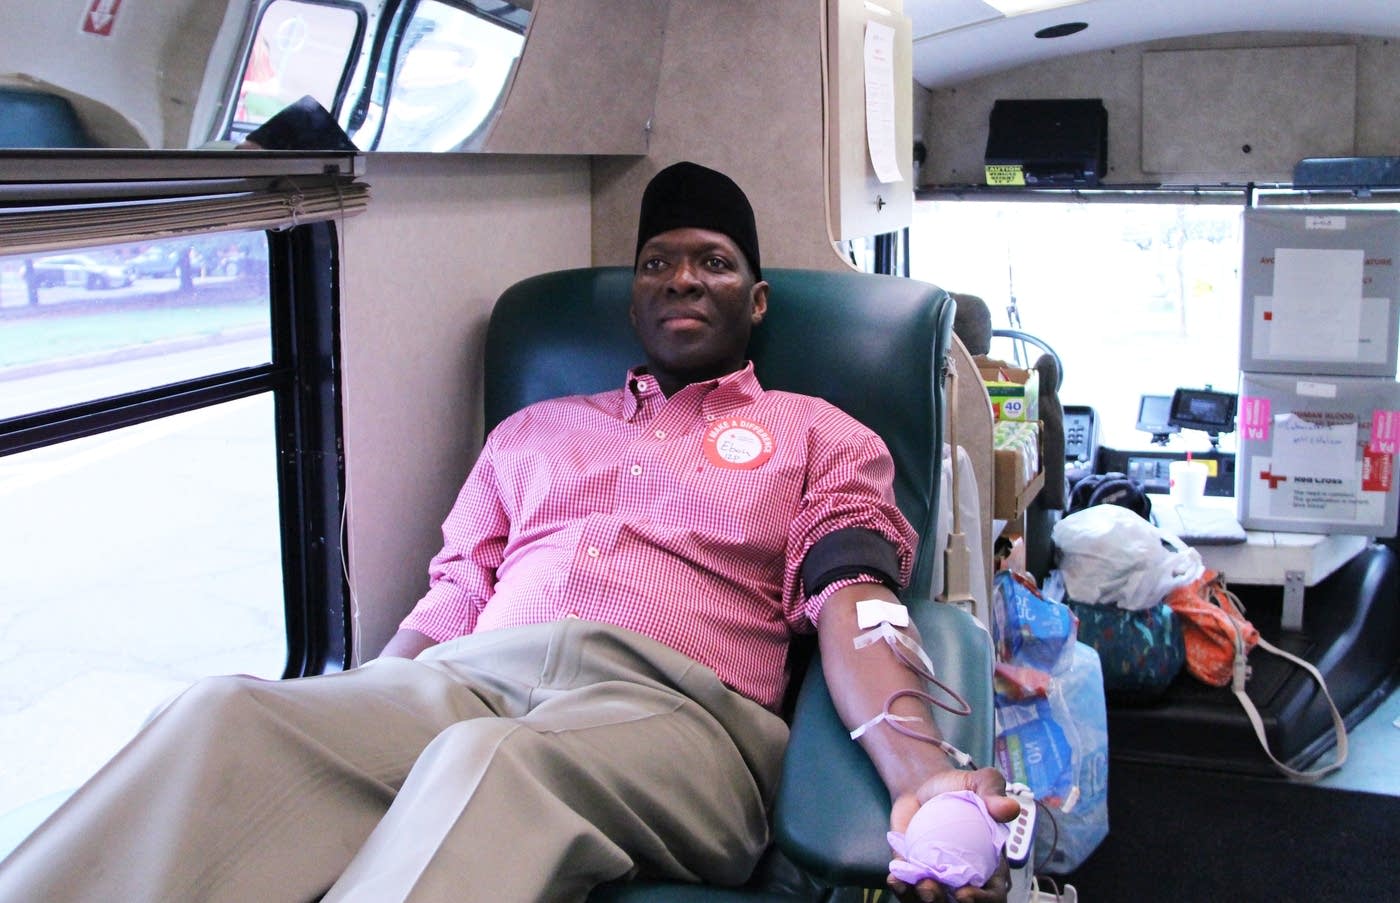 Muslim faith group honors 9/11 victims with blood drive in St. Paul